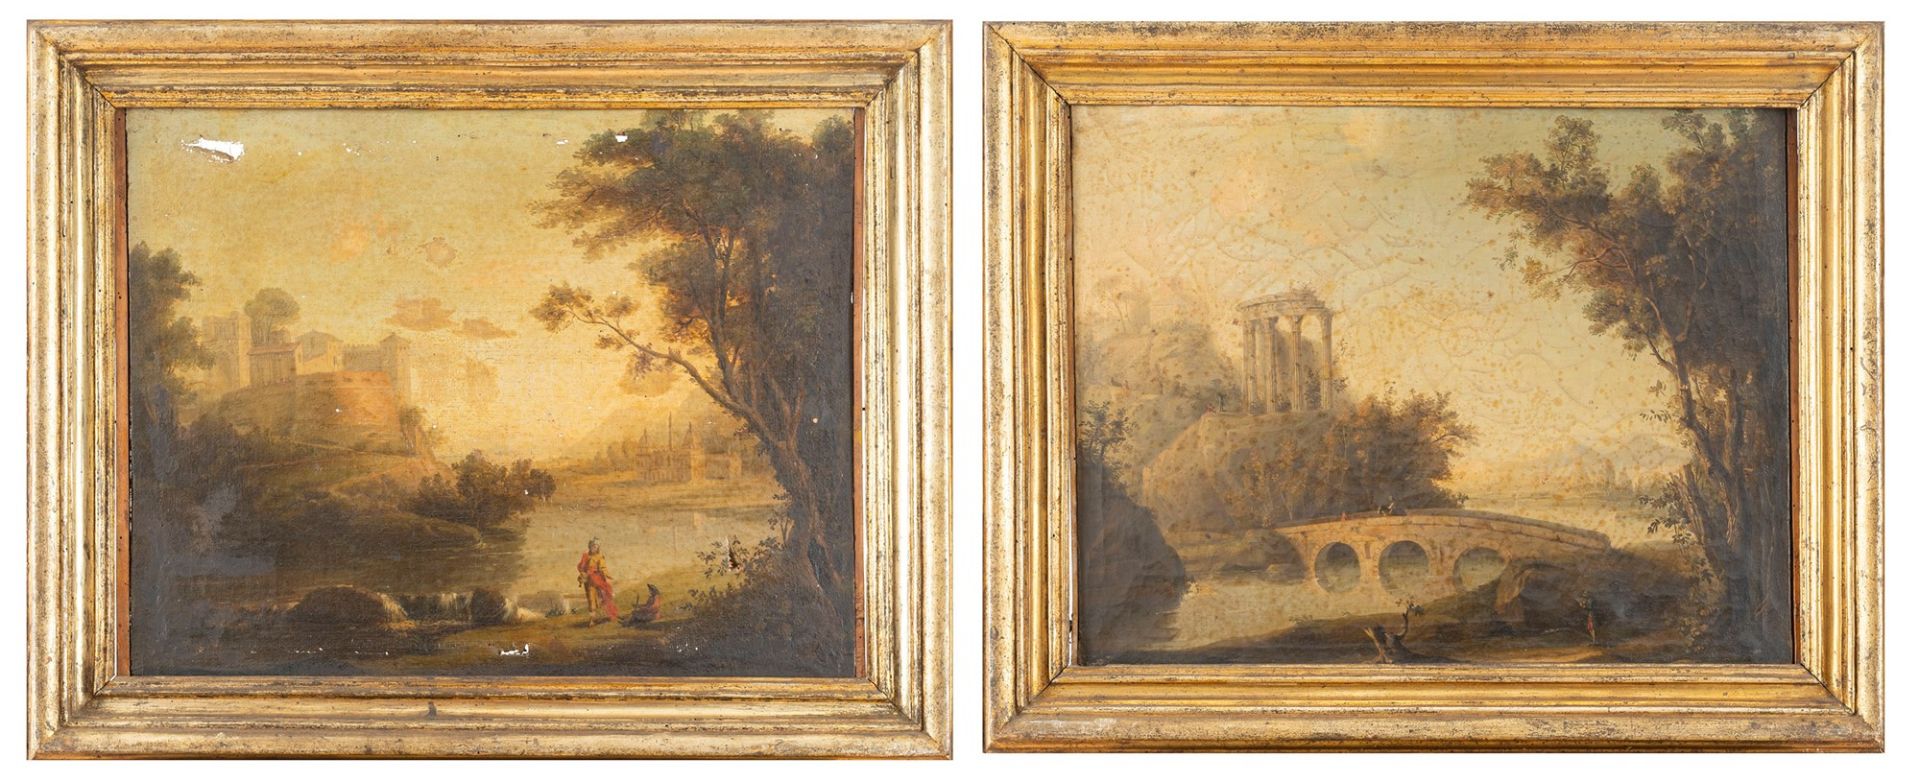 Italian school, late eighteenth century - early nineteenth century - Two Arcadian landscapes with by